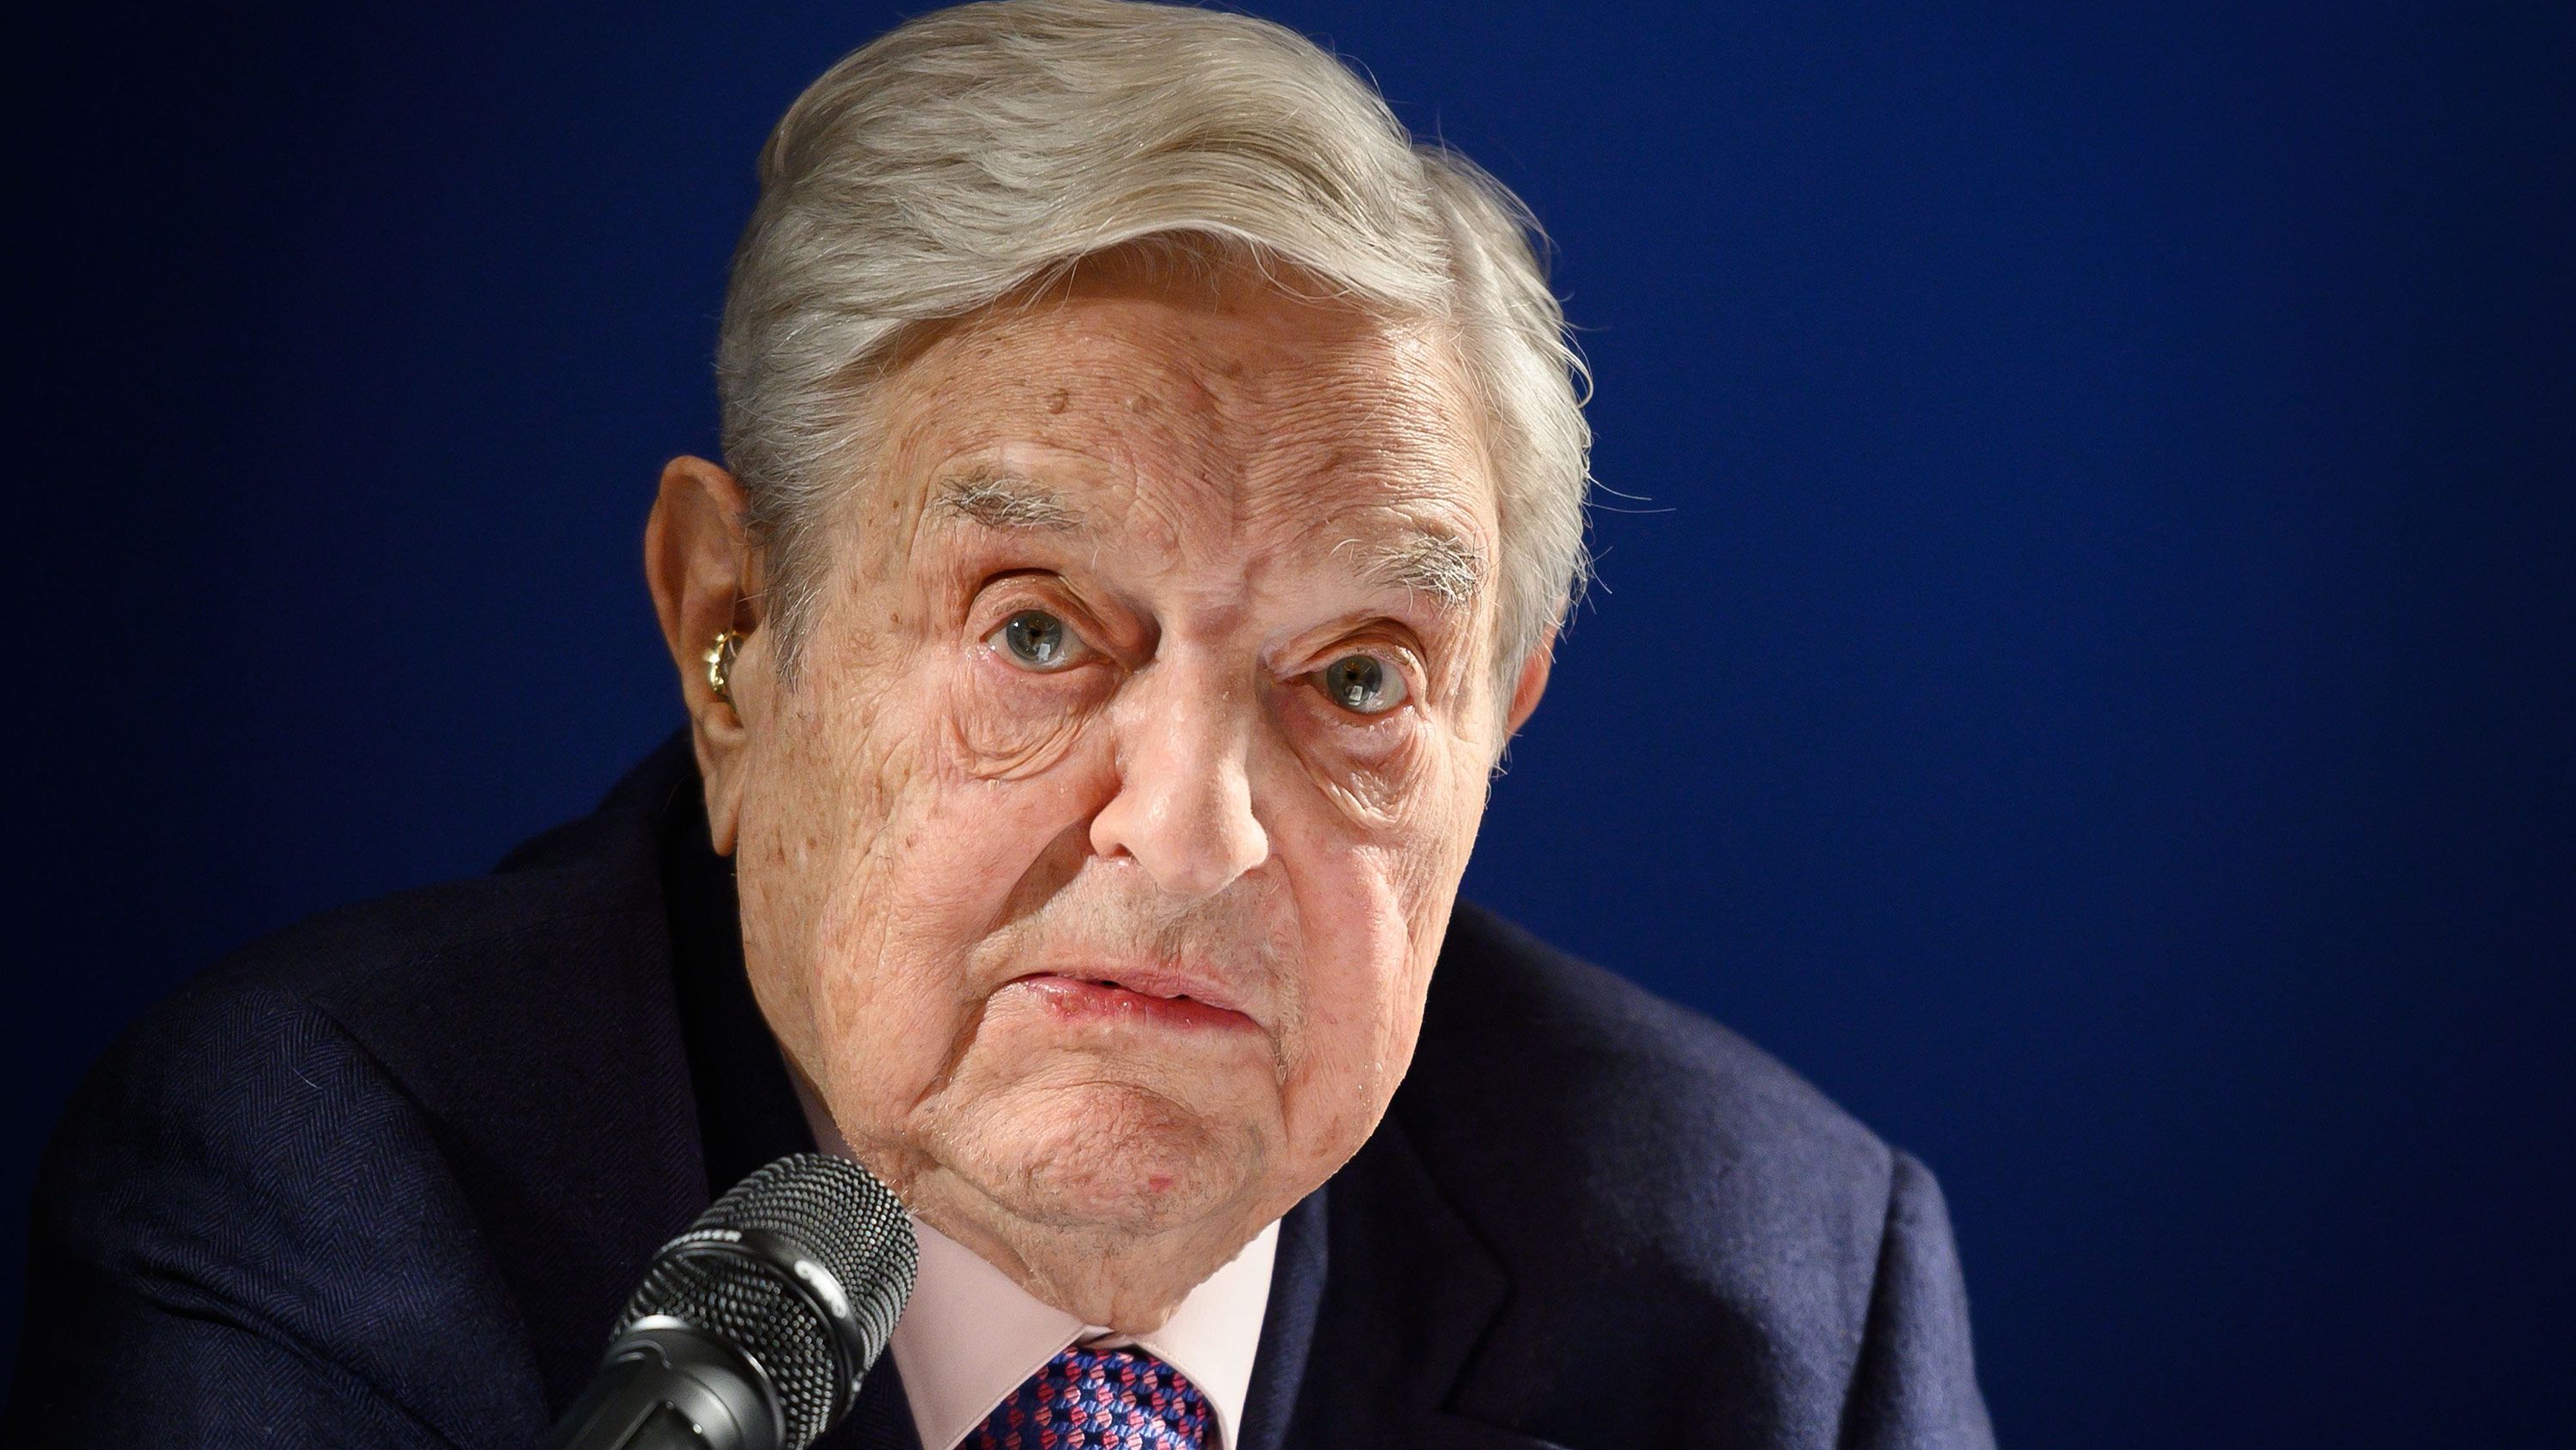 Hungarian-born US investor and philanthropist George Soros delivers a speech on the sideline of the World Economic Forum (WEF) annual meeting, on January 24, 2019 in Davos, eastern Switzerland. - Billionaire investor George Soros said, on January 24, 2019 that Chinese President Xi Jinping was "the most dangerous enemy" of free societies for presiding over a high-tech surveillance regime.